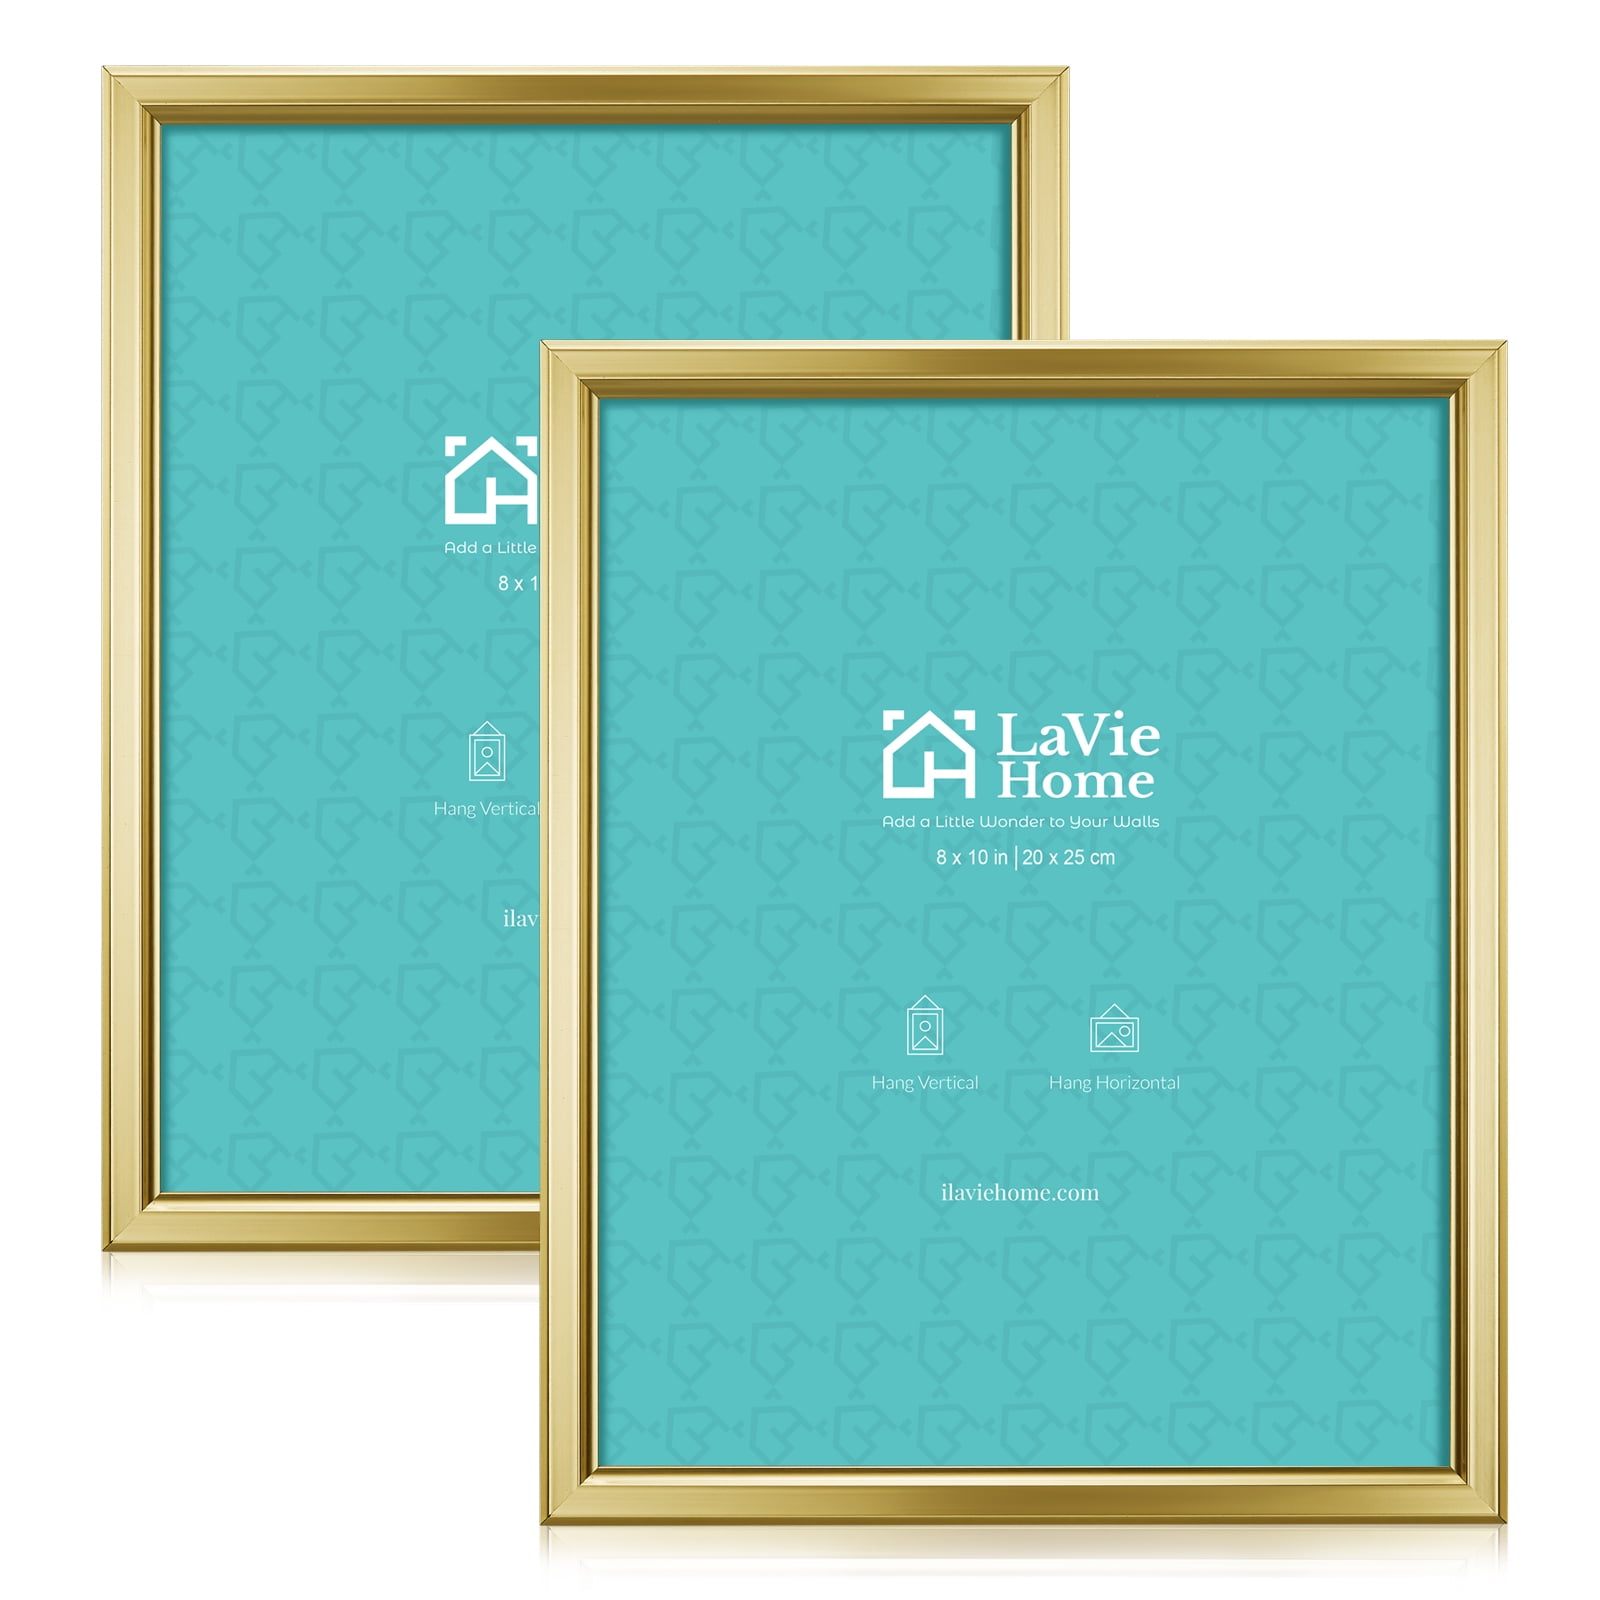 LaVie Home 4x6 Picture Frames (2 Pack, White) Simple Designed Photo Fr